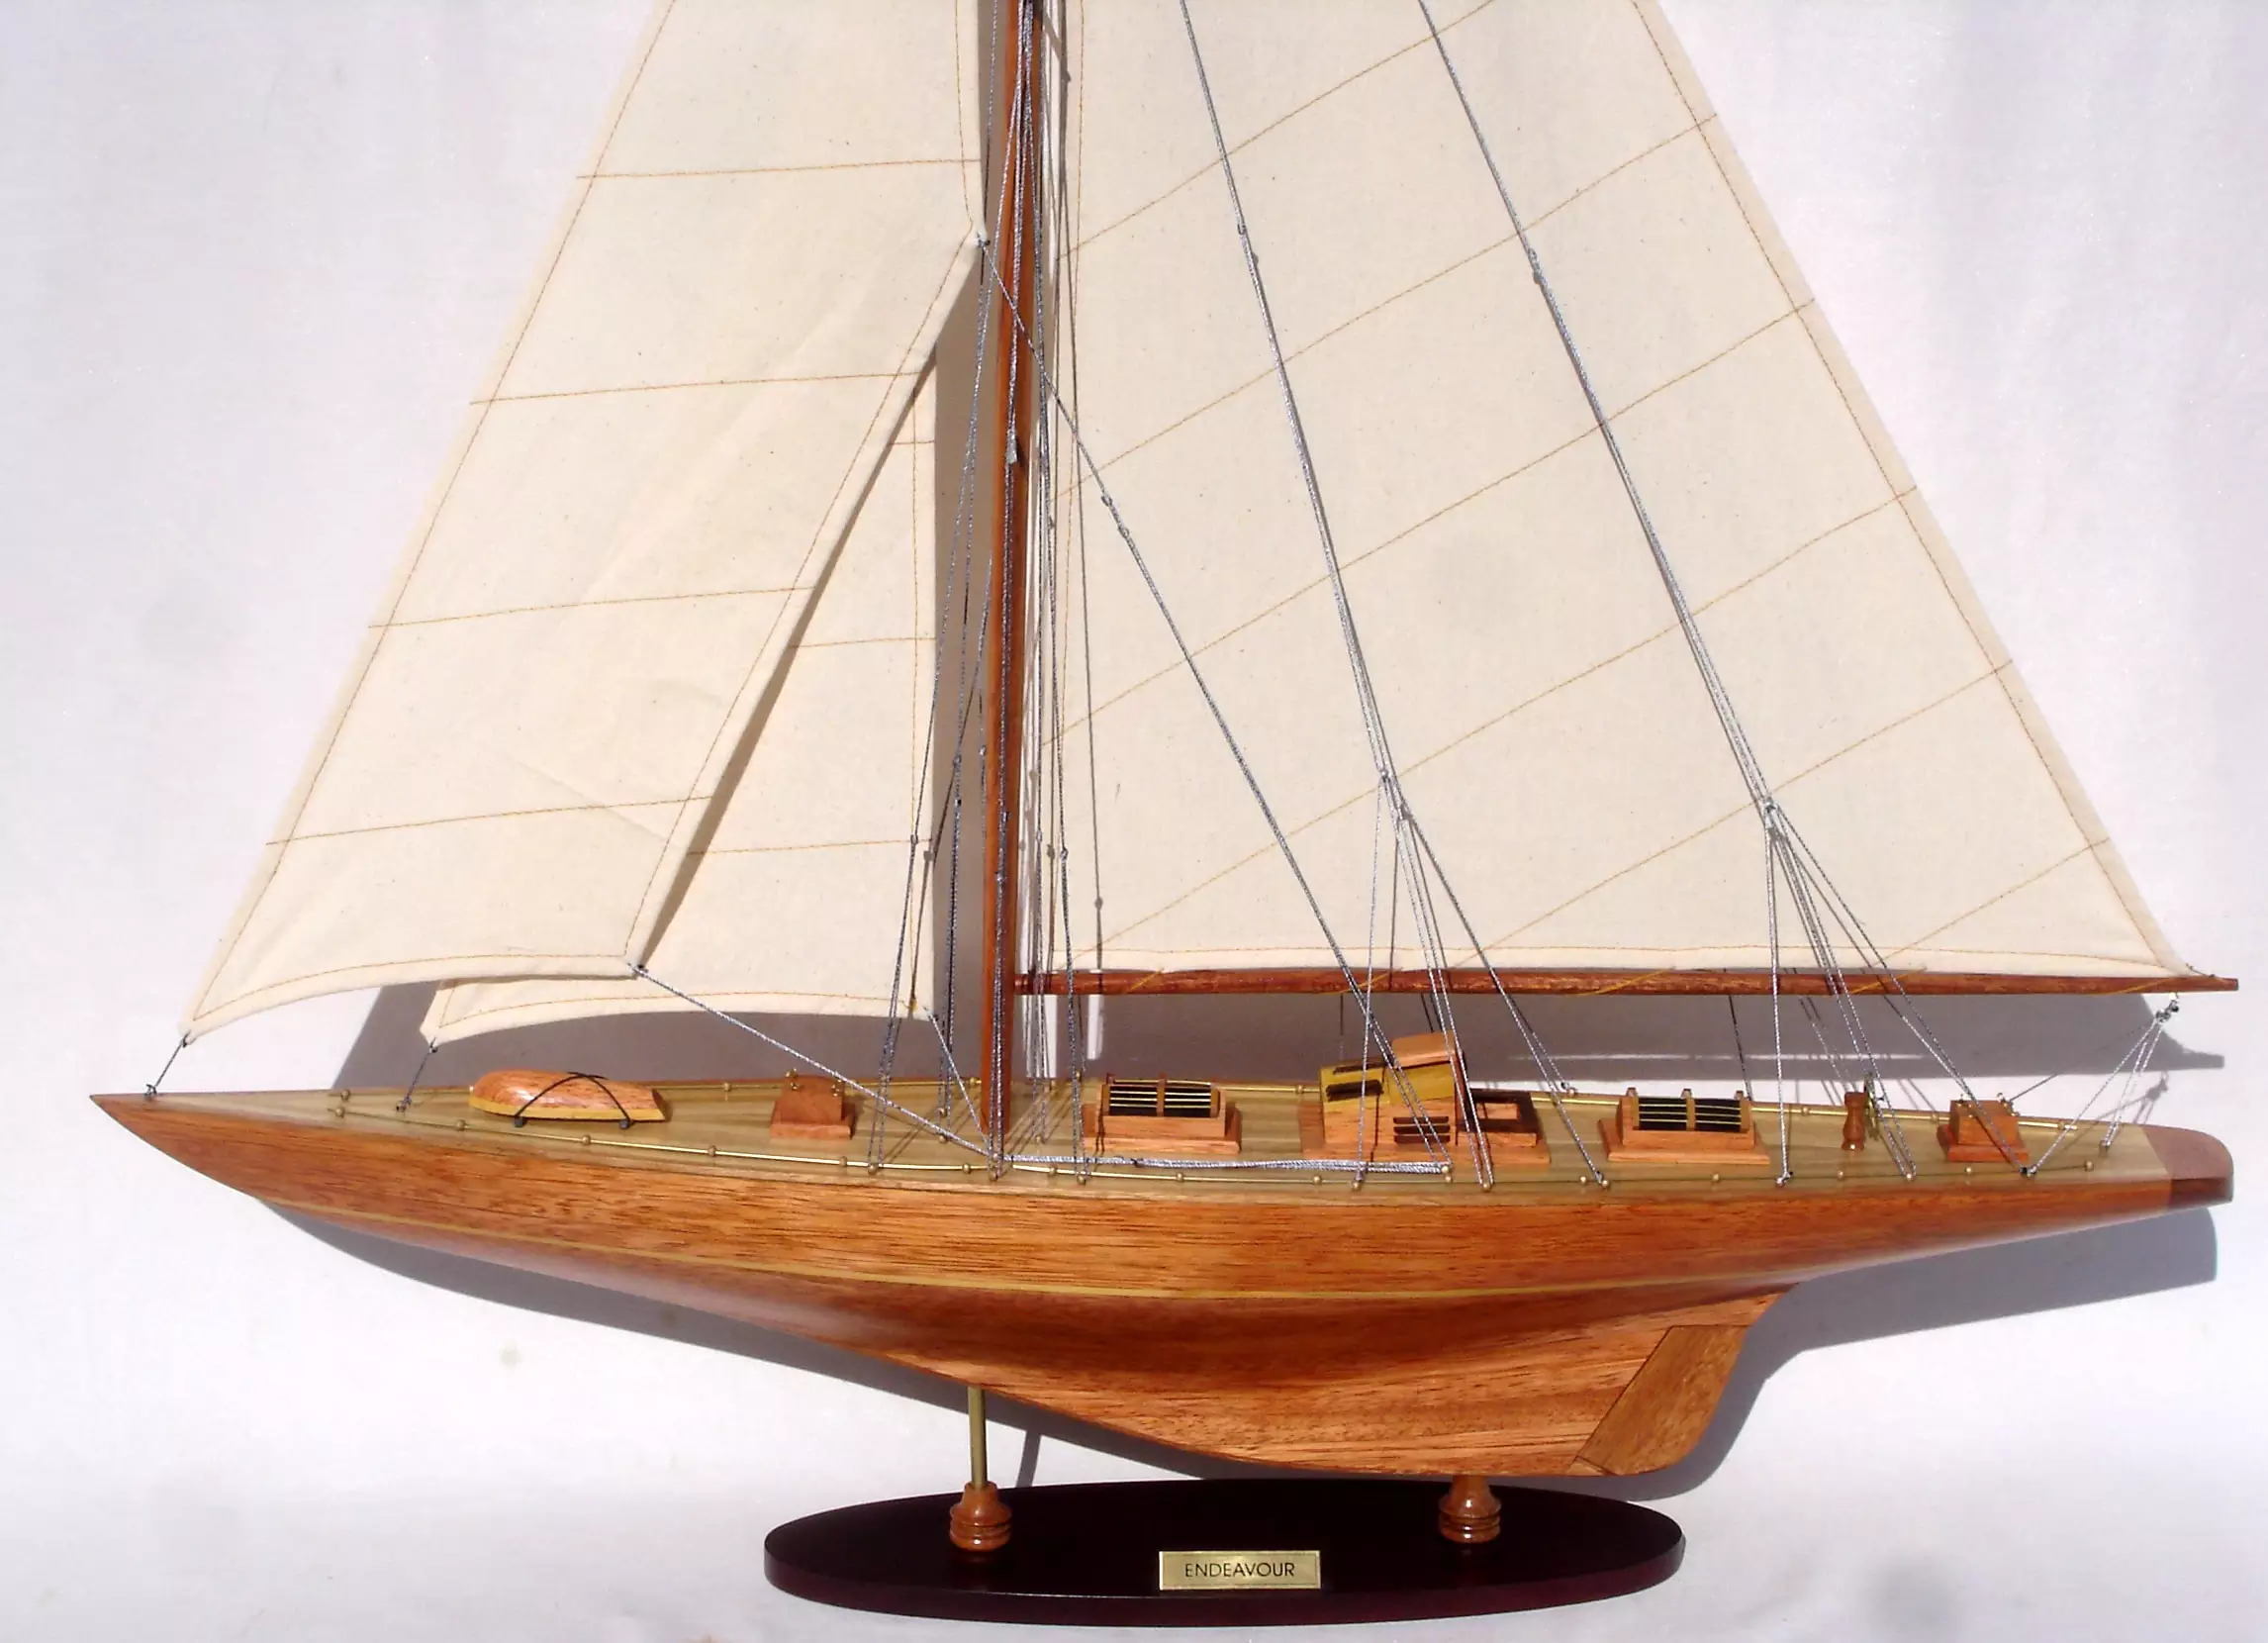 Details about   Endeavour Sailing Boat Model 24" Handcrafted Wooden Model 